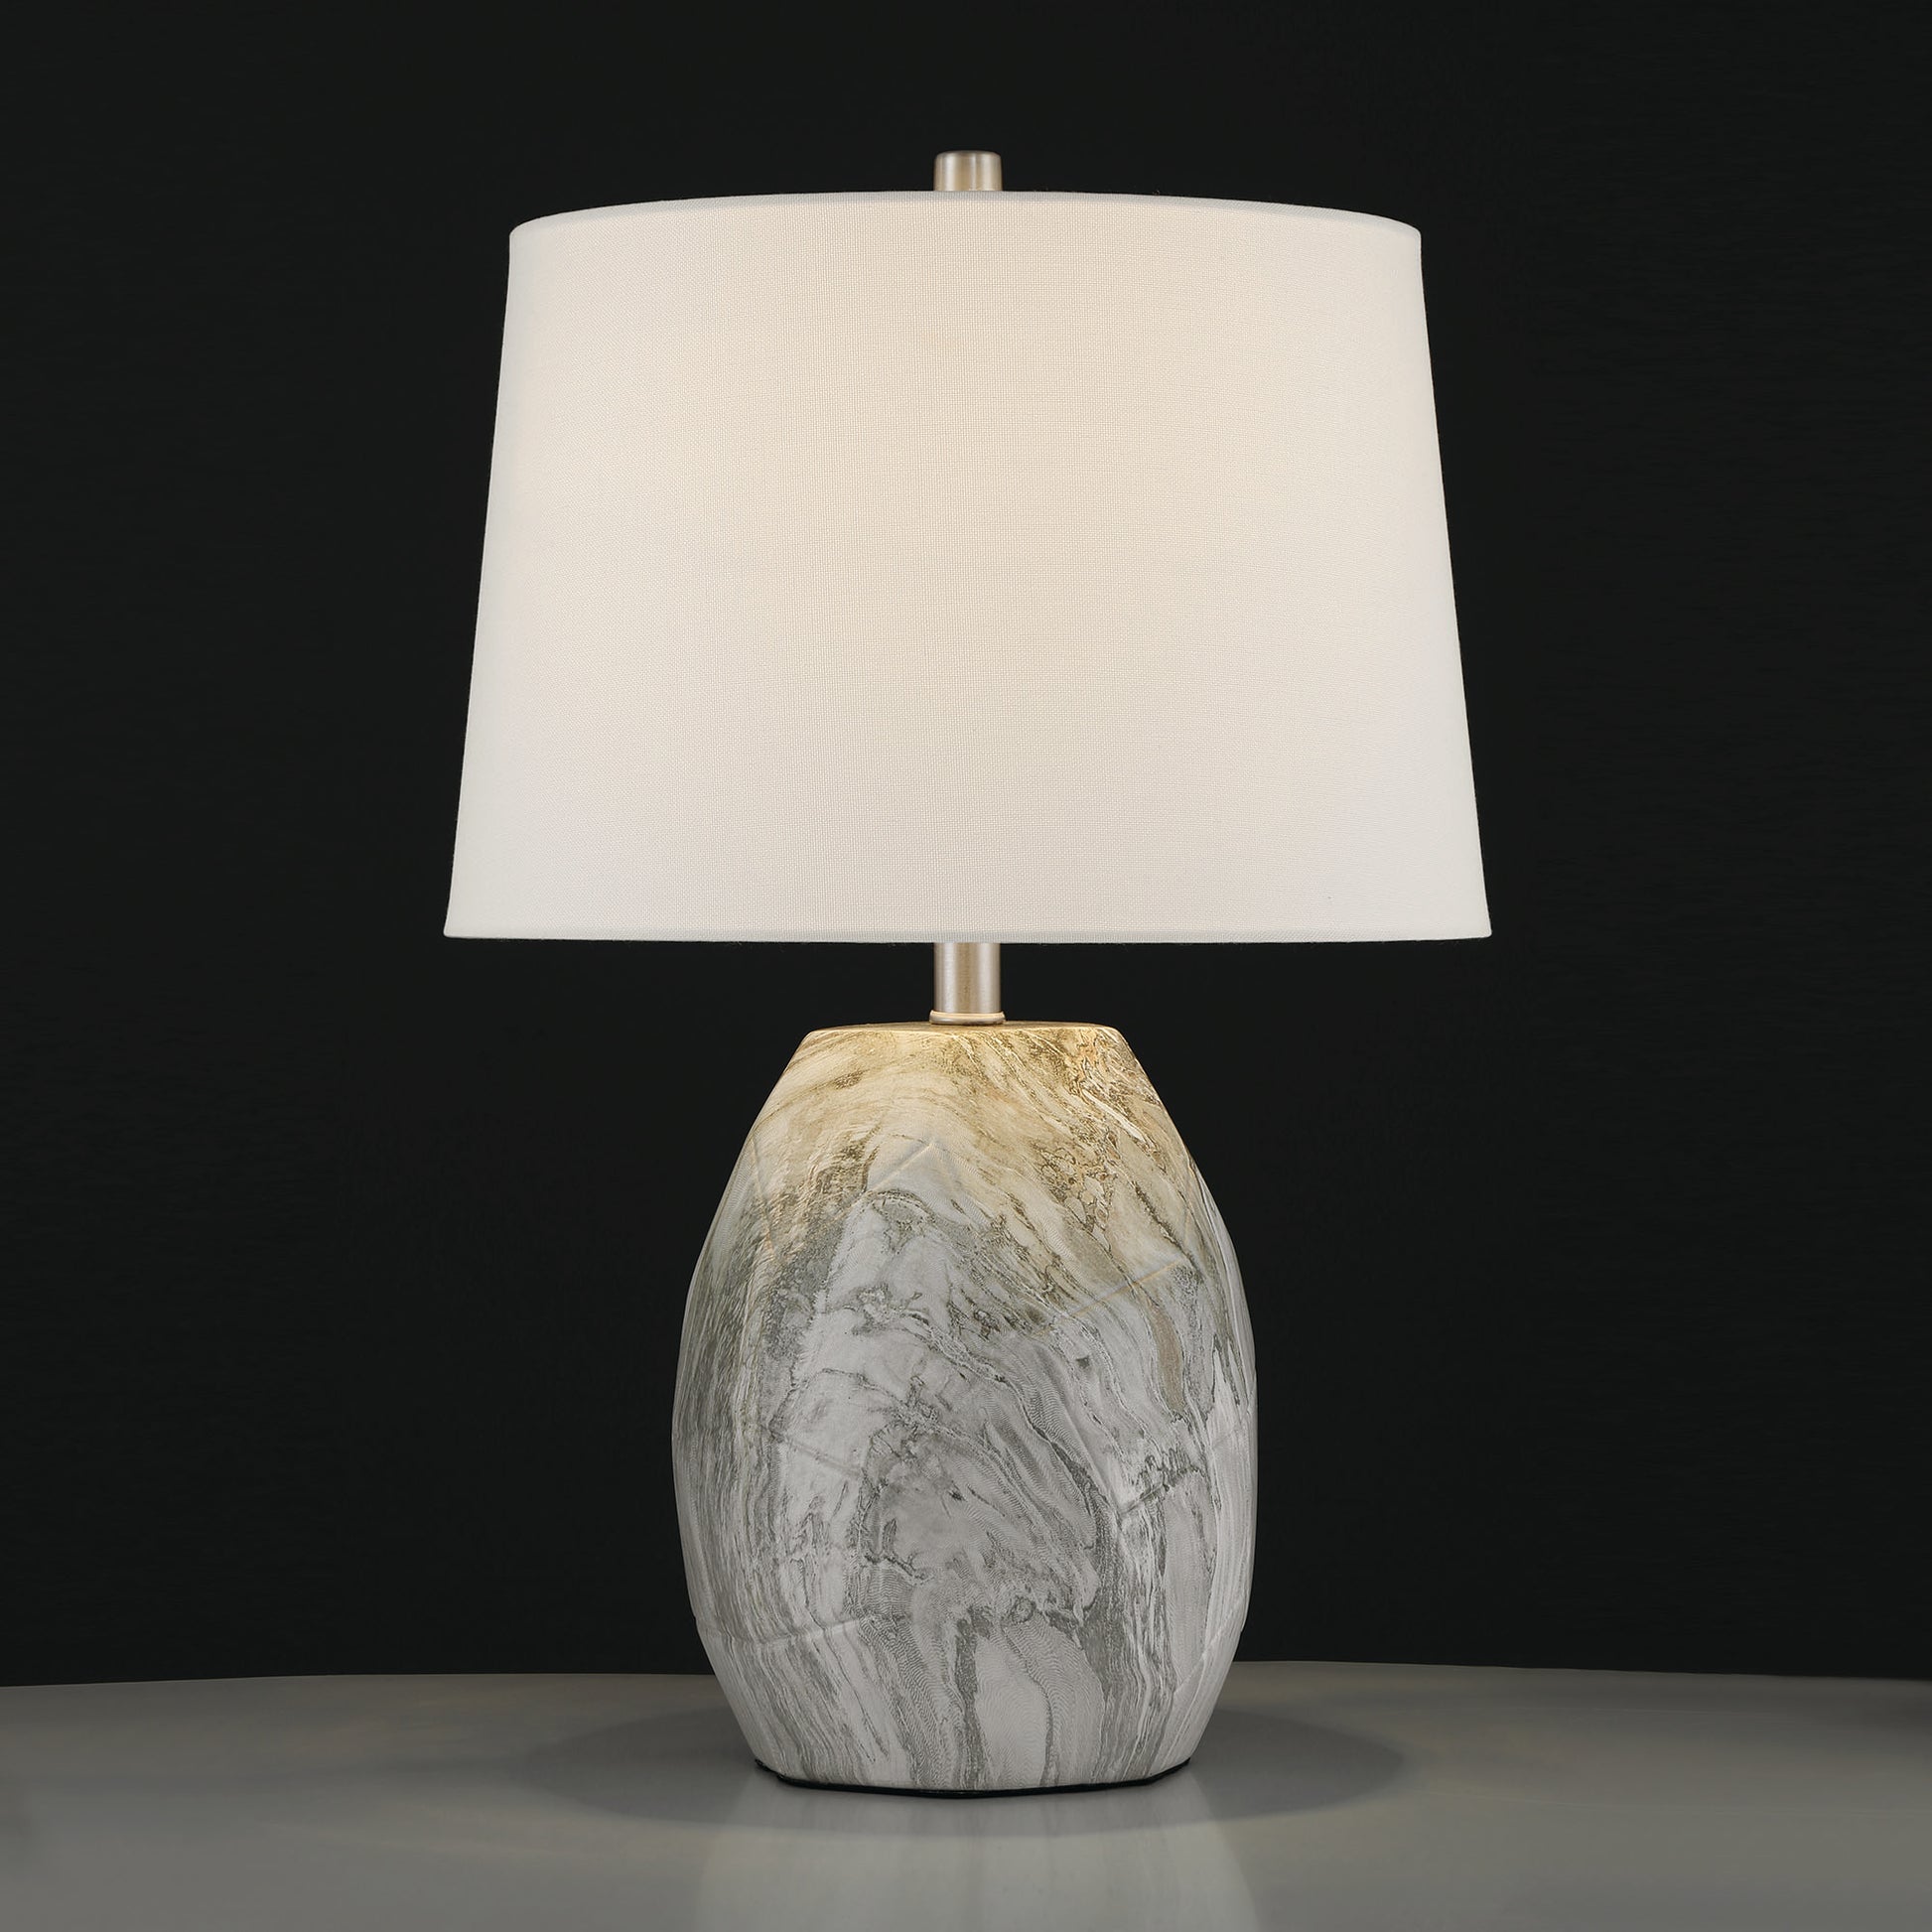 1 light marble ceramic table lamp set of 2 (2) by ACROMA